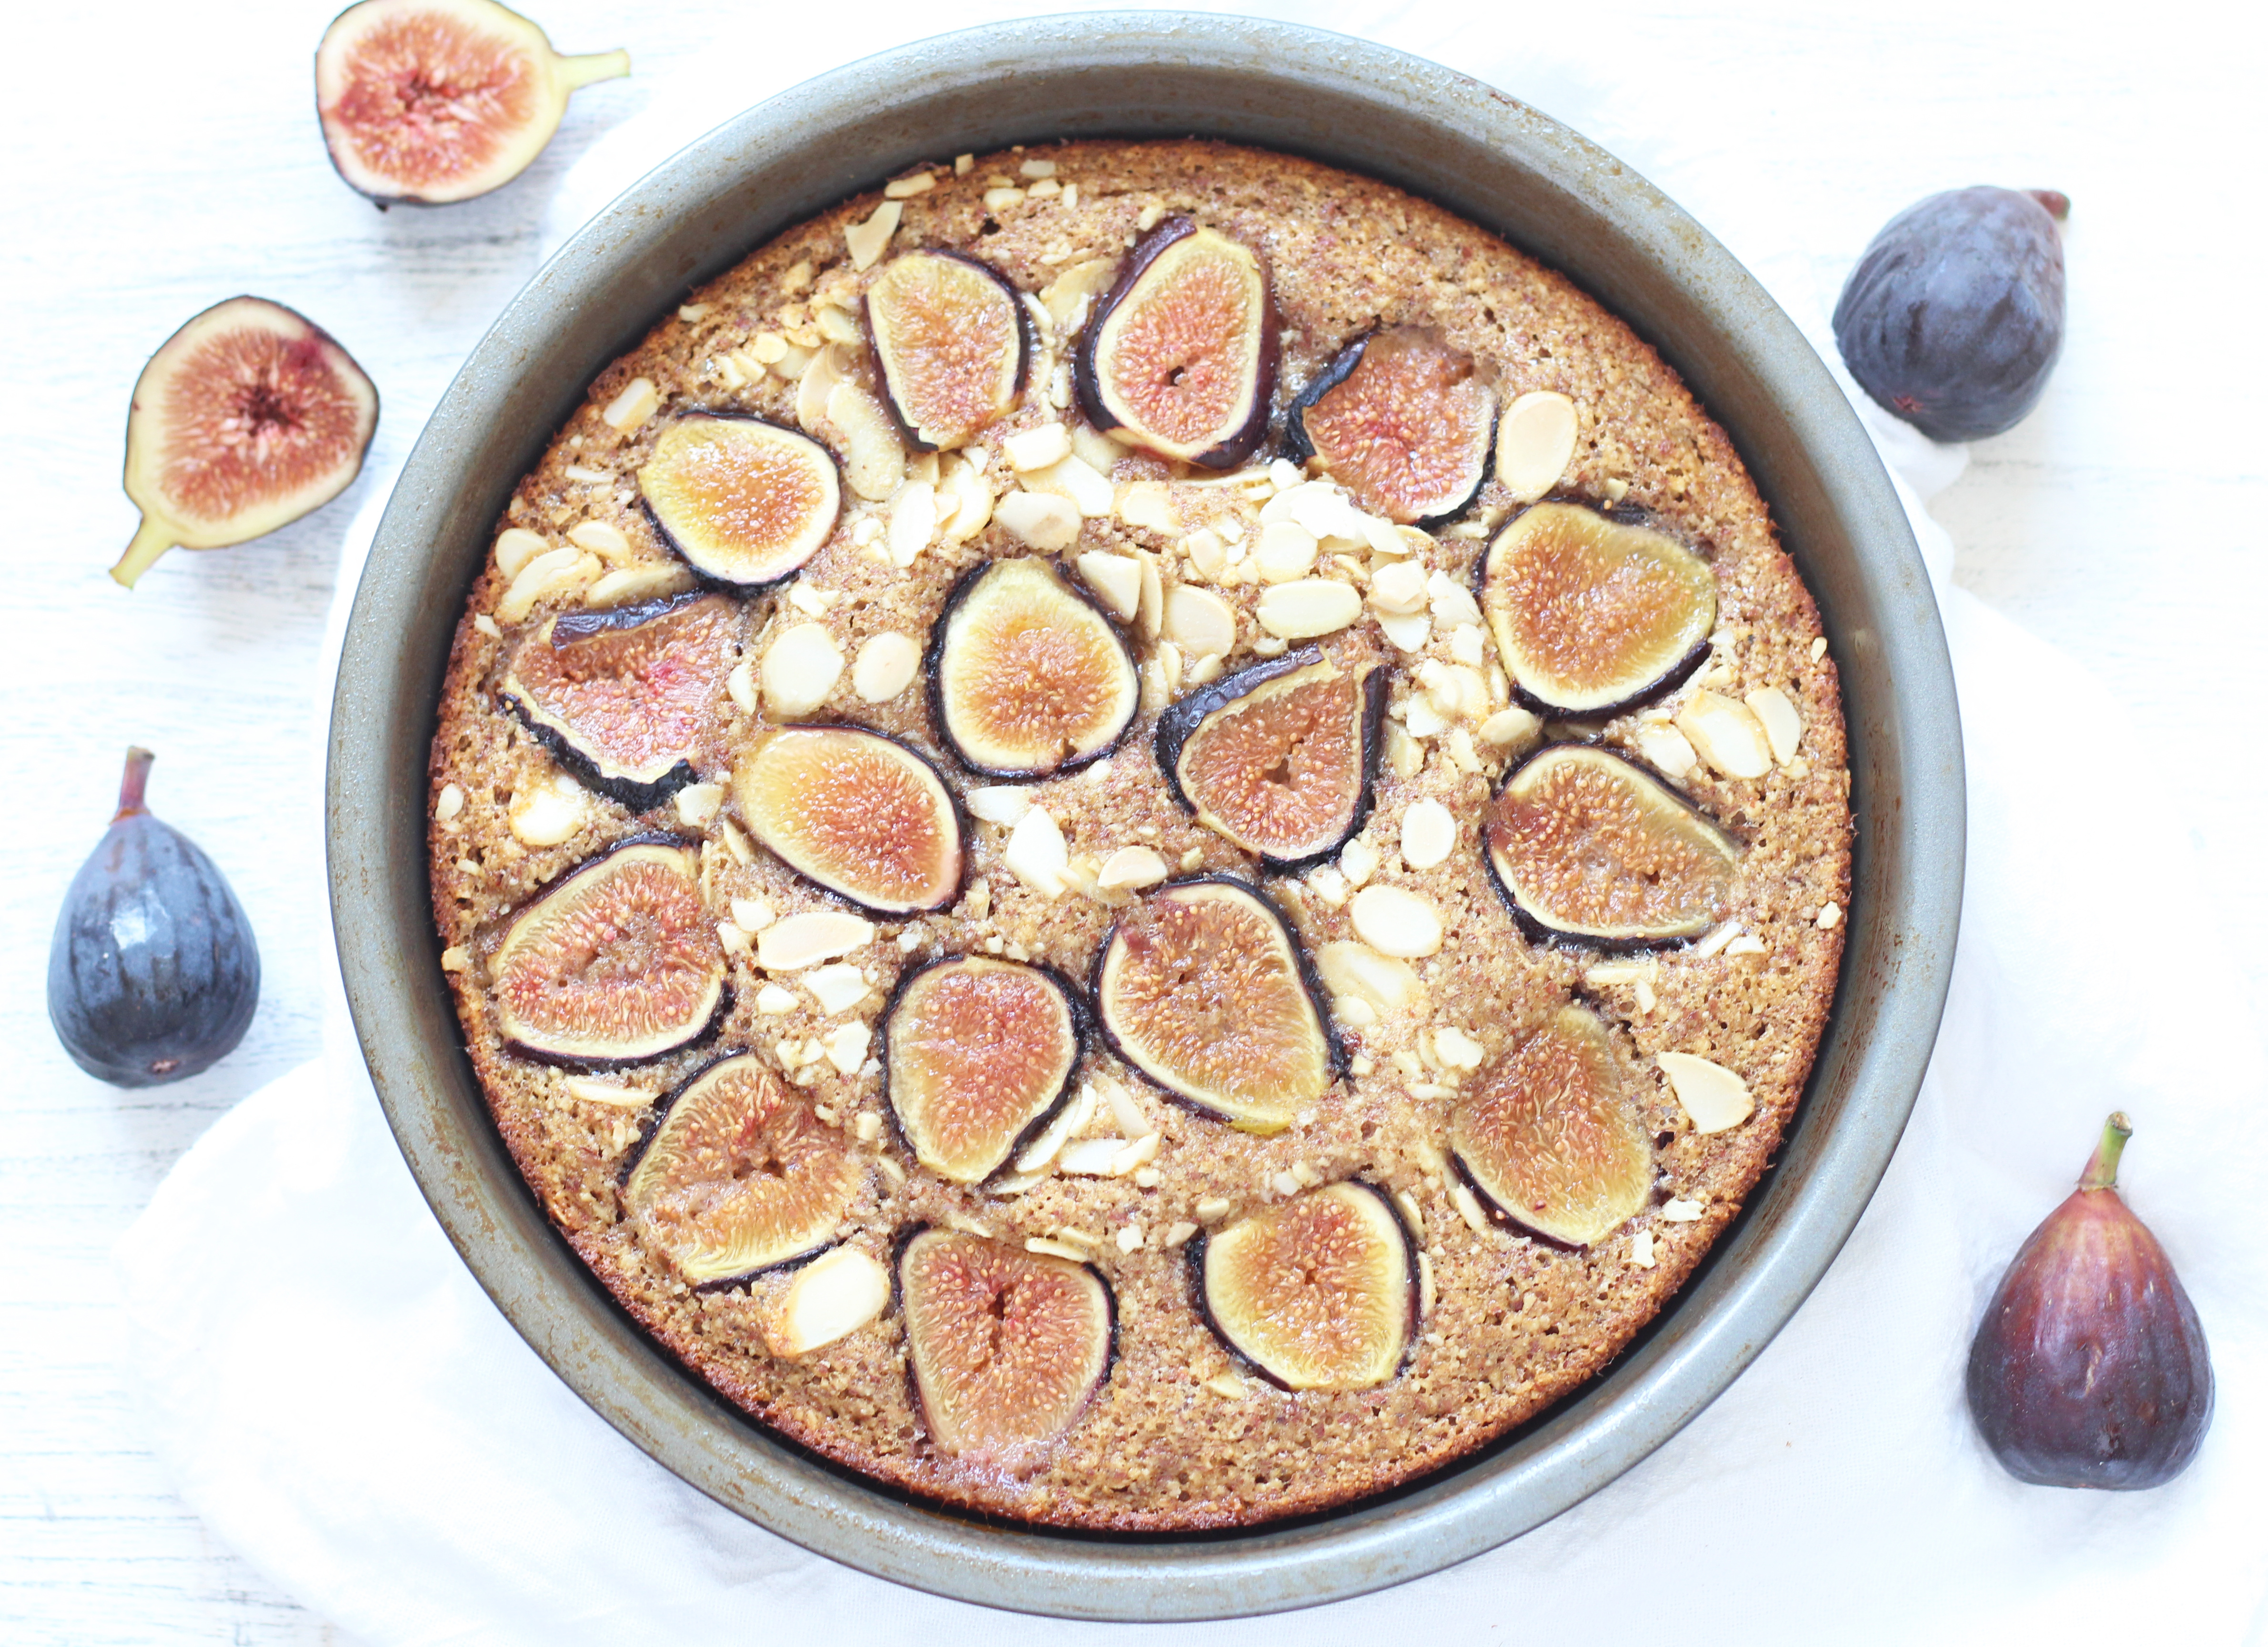 Fig and almond snacking cake - dairy-free and sweetened with honey and free of refined sugars, this cake makes a great snack or breakfast!